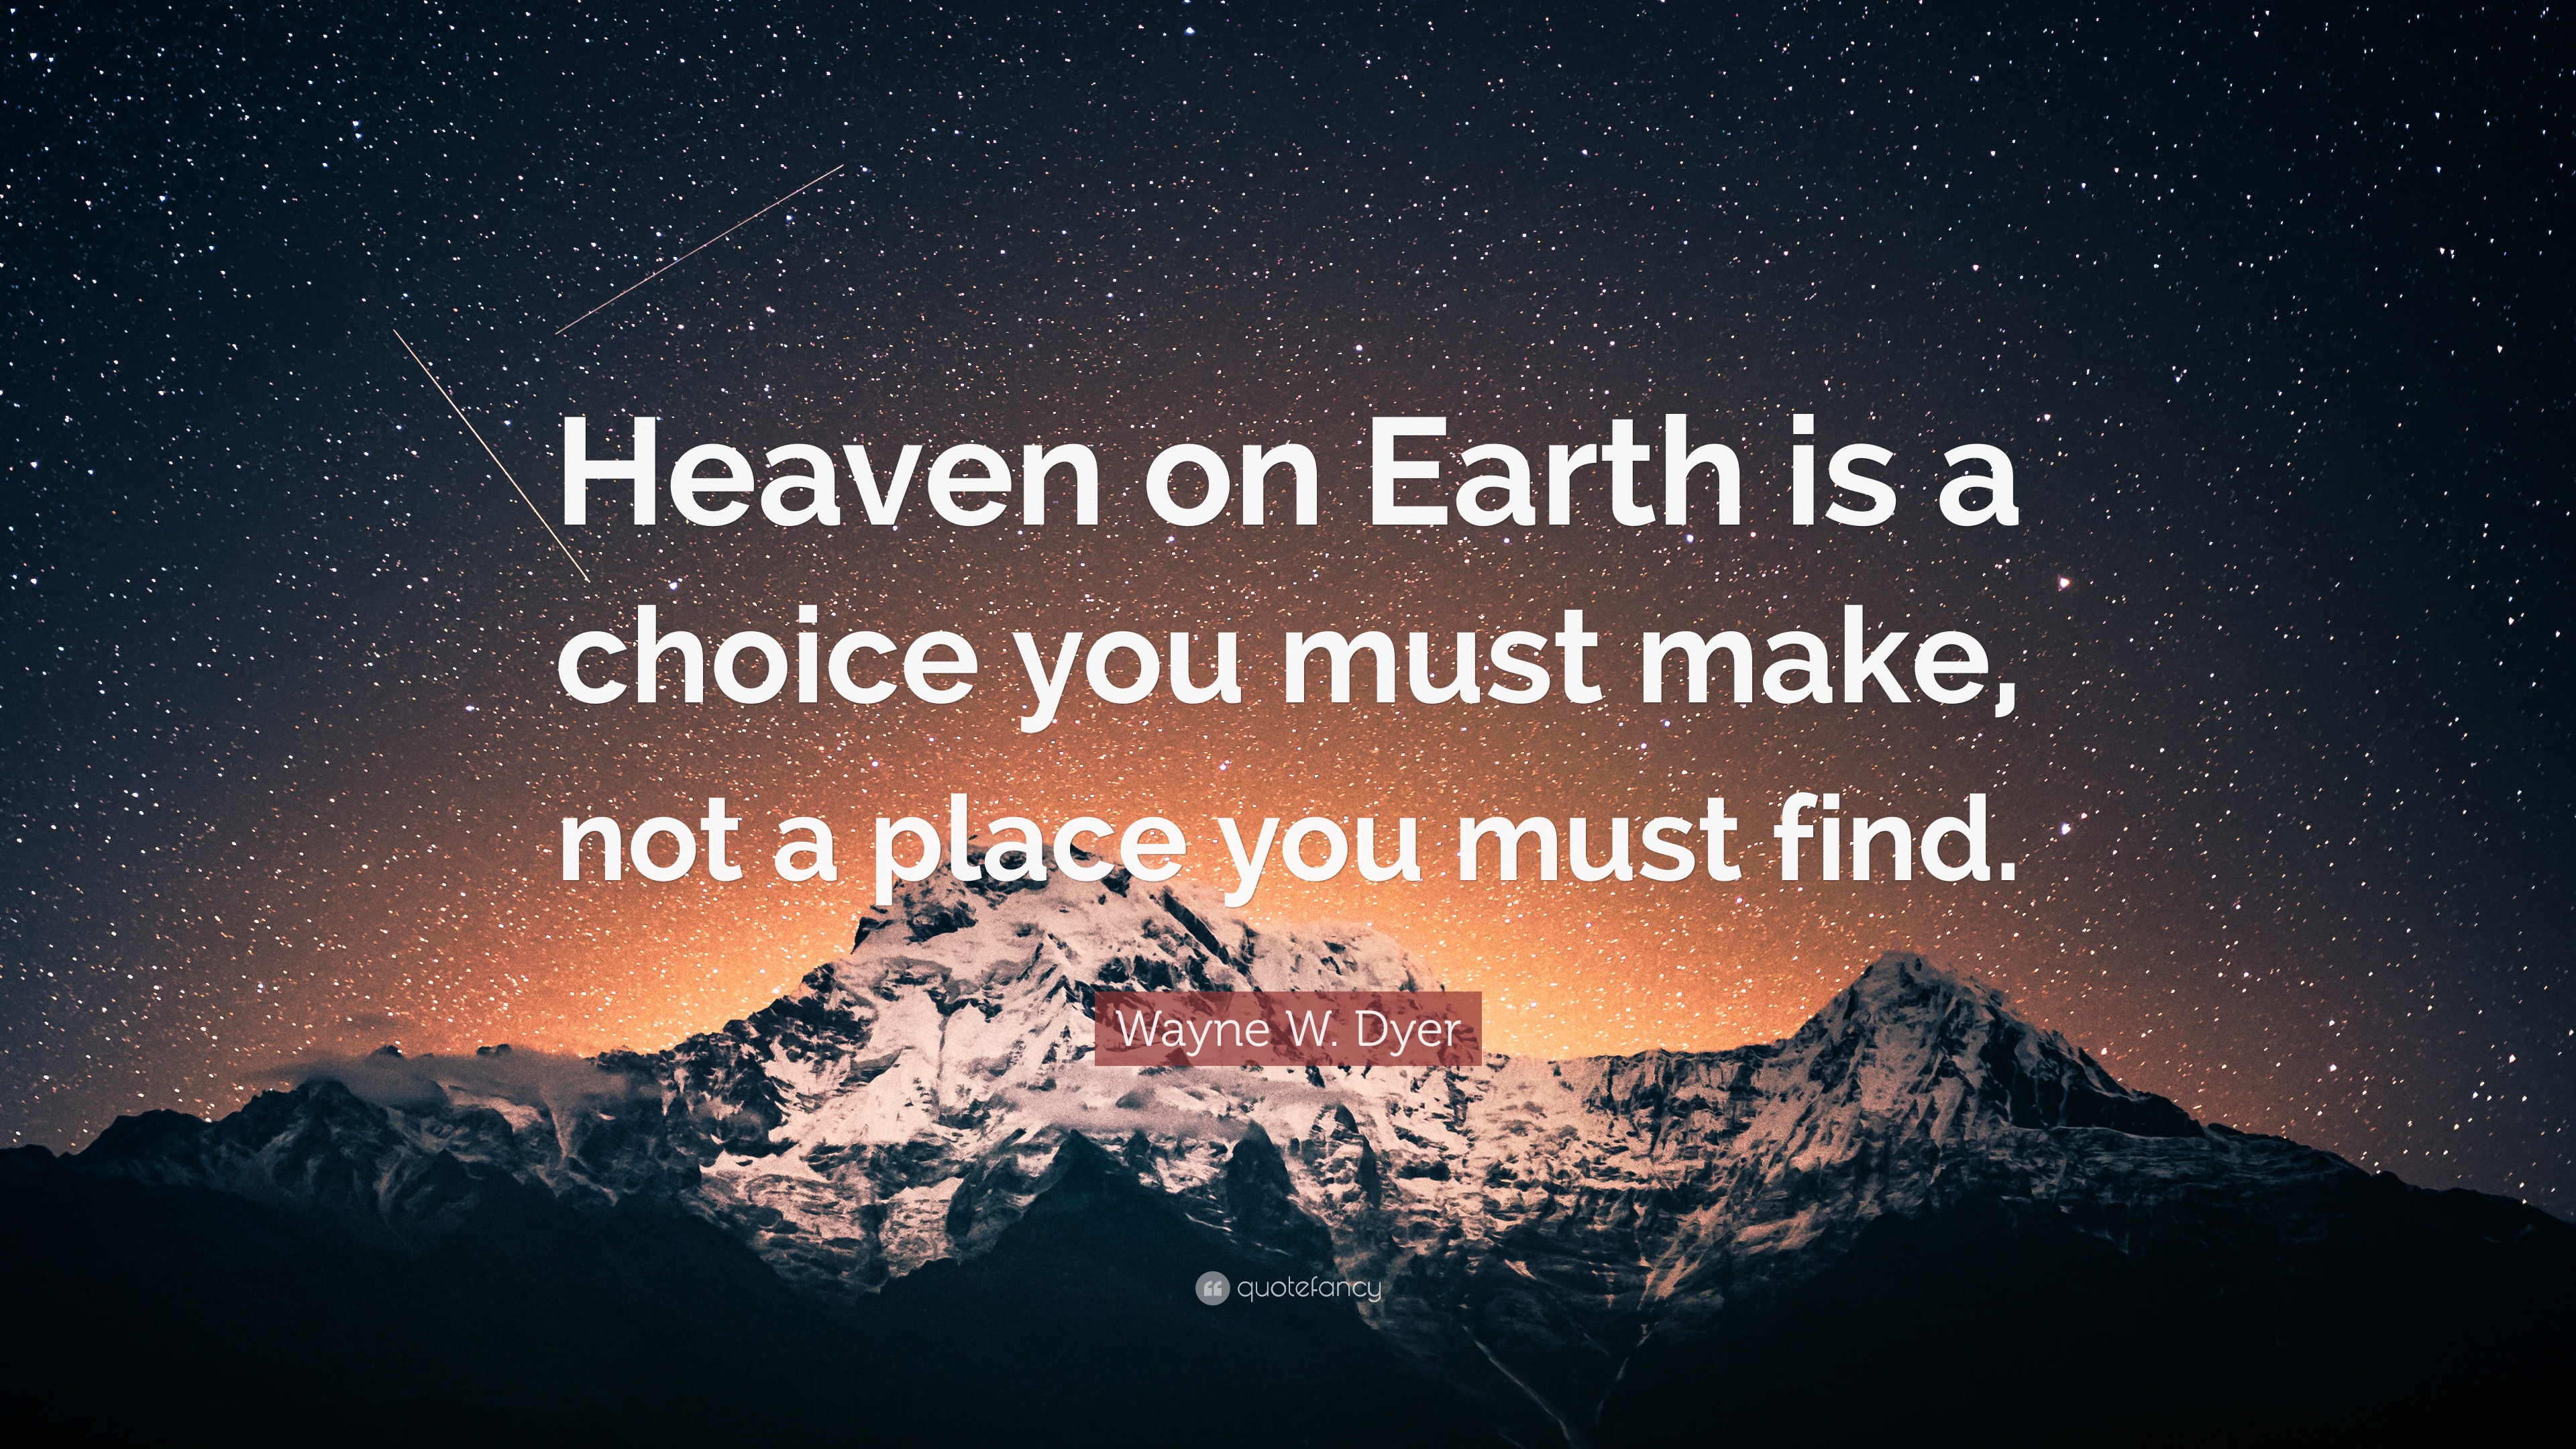 https://quotefancy.com/media/wallpaper/3840x2160/2010049-Wayne-W-Dyer-Quote-Heaven-on-Earth-is-a-choice-you-must-make-not-a.jpg